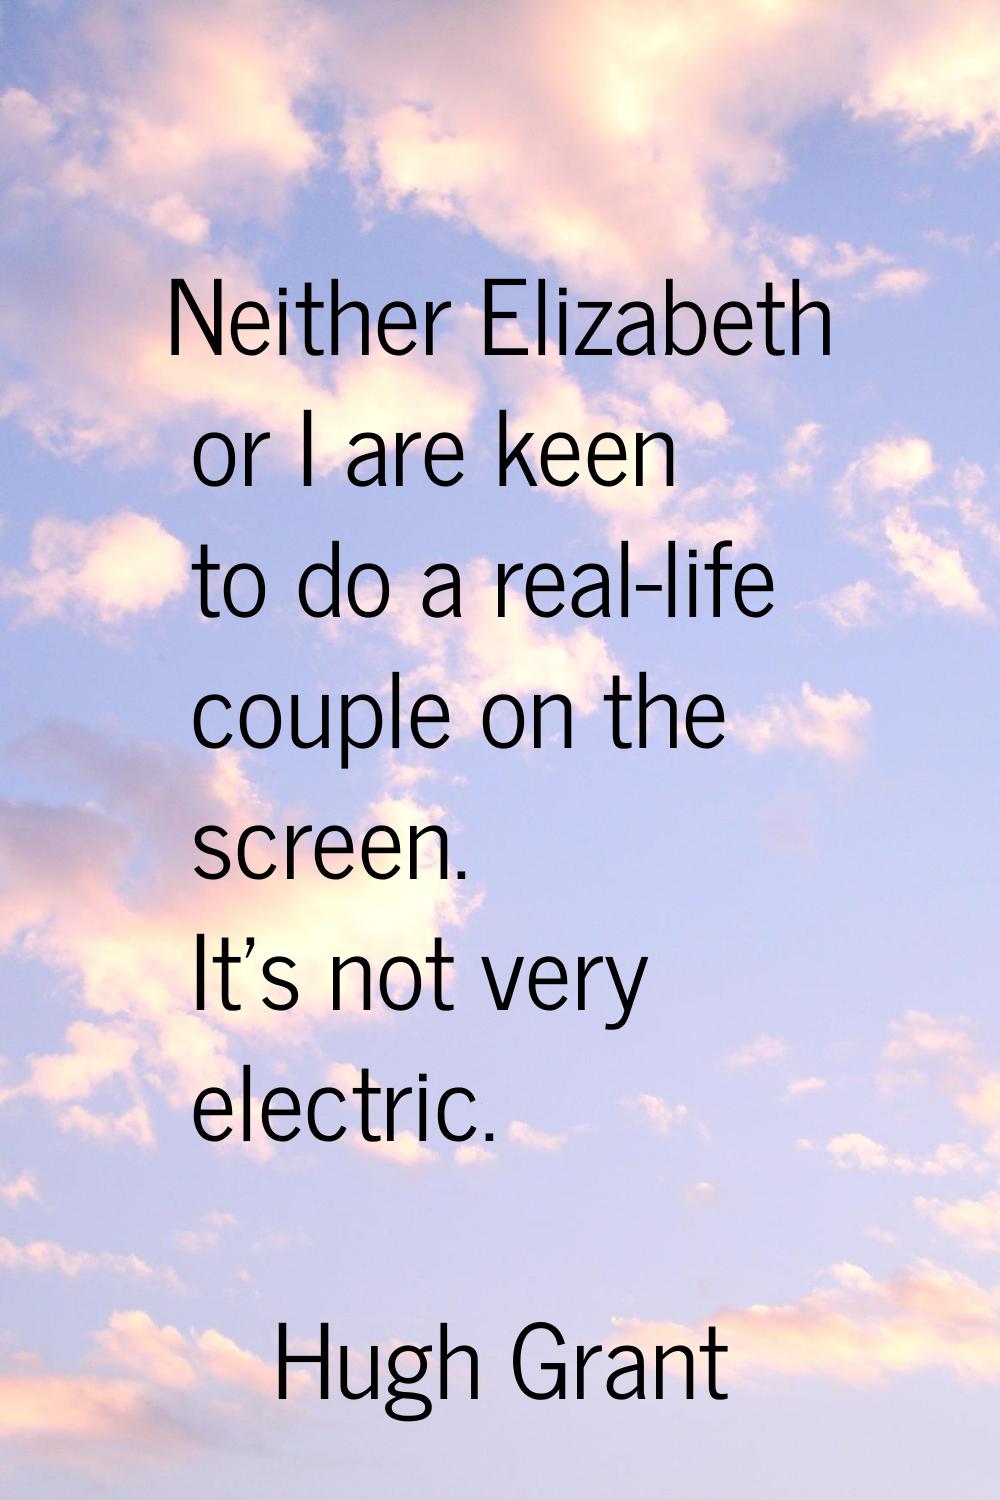 Neither Elizabeth or I are keen to do a real-life couple on the screen. It's not very electric.